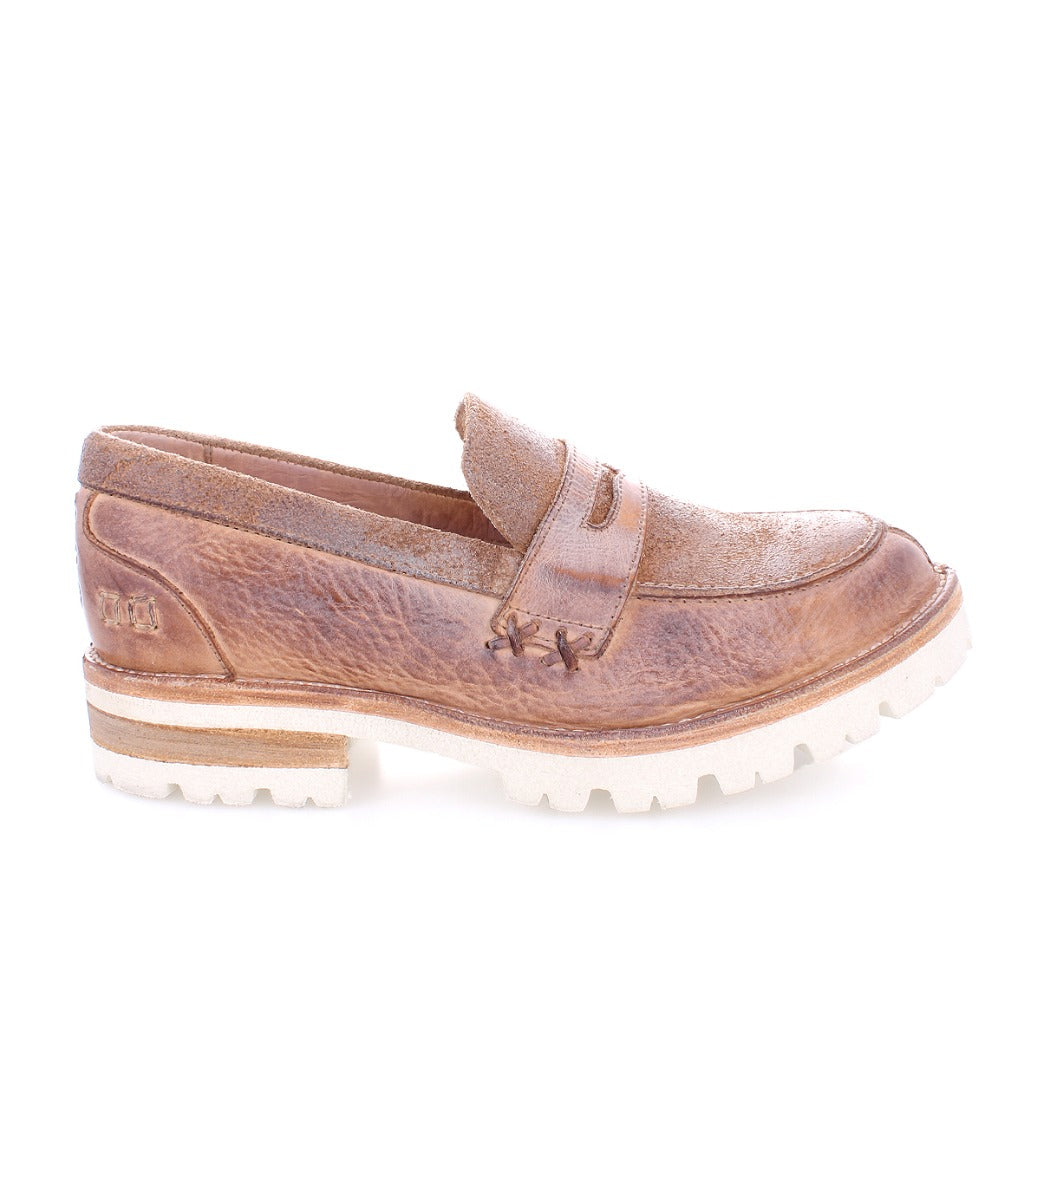 A women's brown Reina III loafer with white outsole by Bed Stu.